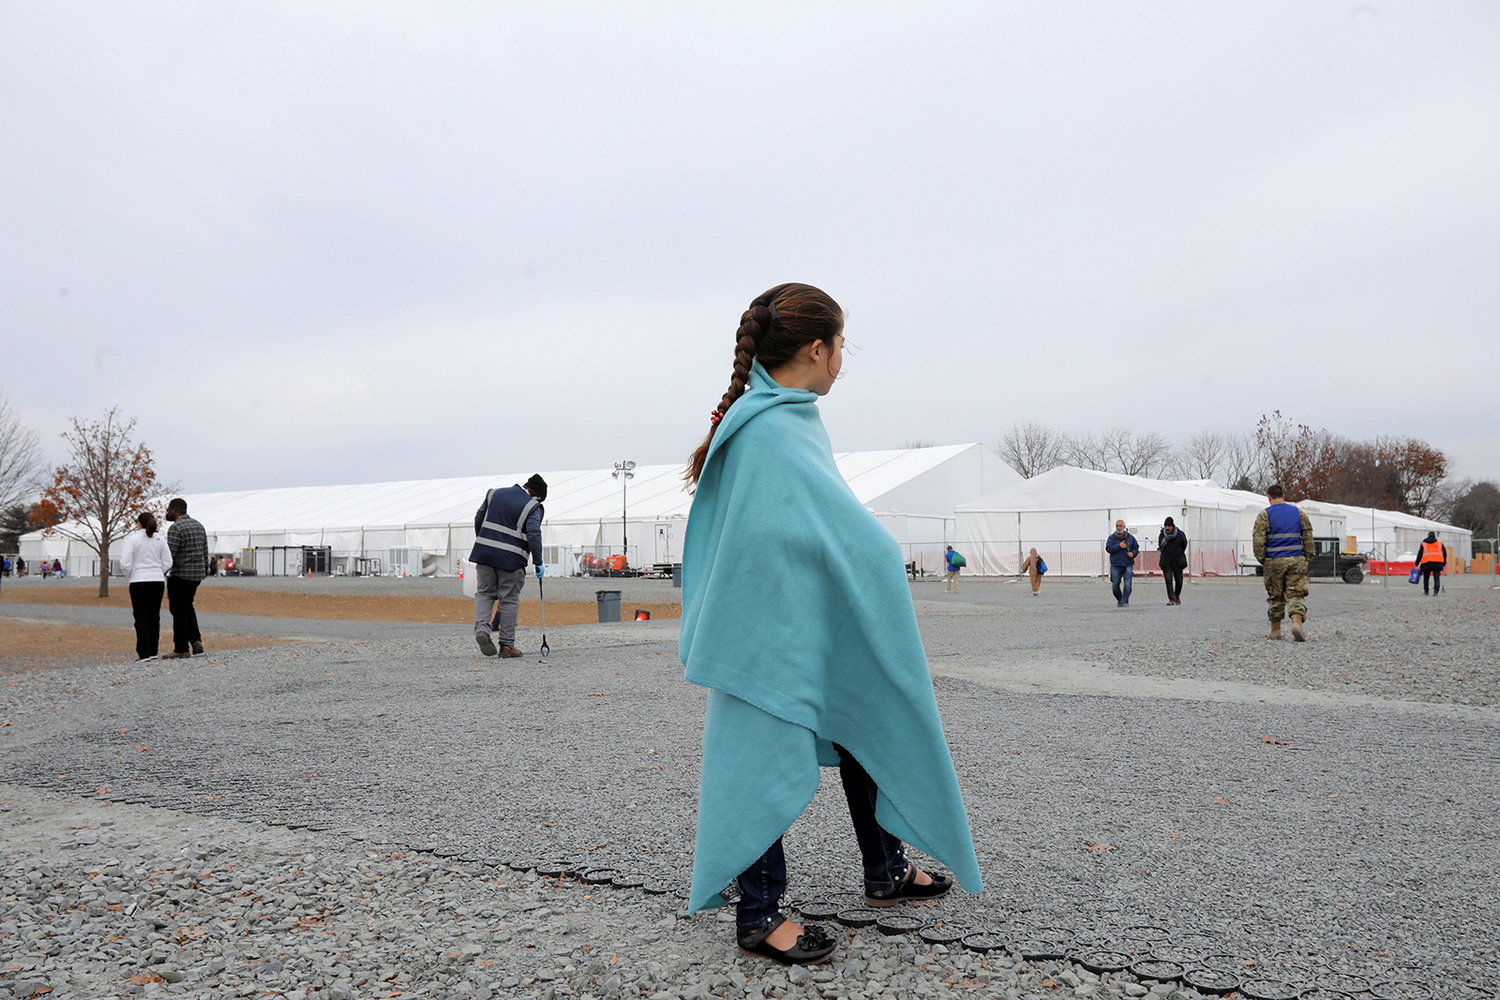 An Afghan girl looks on at temporary housing in Liberty Village  on Dec. 2, 2021, in Joint Base McGuire-Dix-Lakehurst, New Jersey. (Barbara Davidson/Pool/Getty Images/TNS)